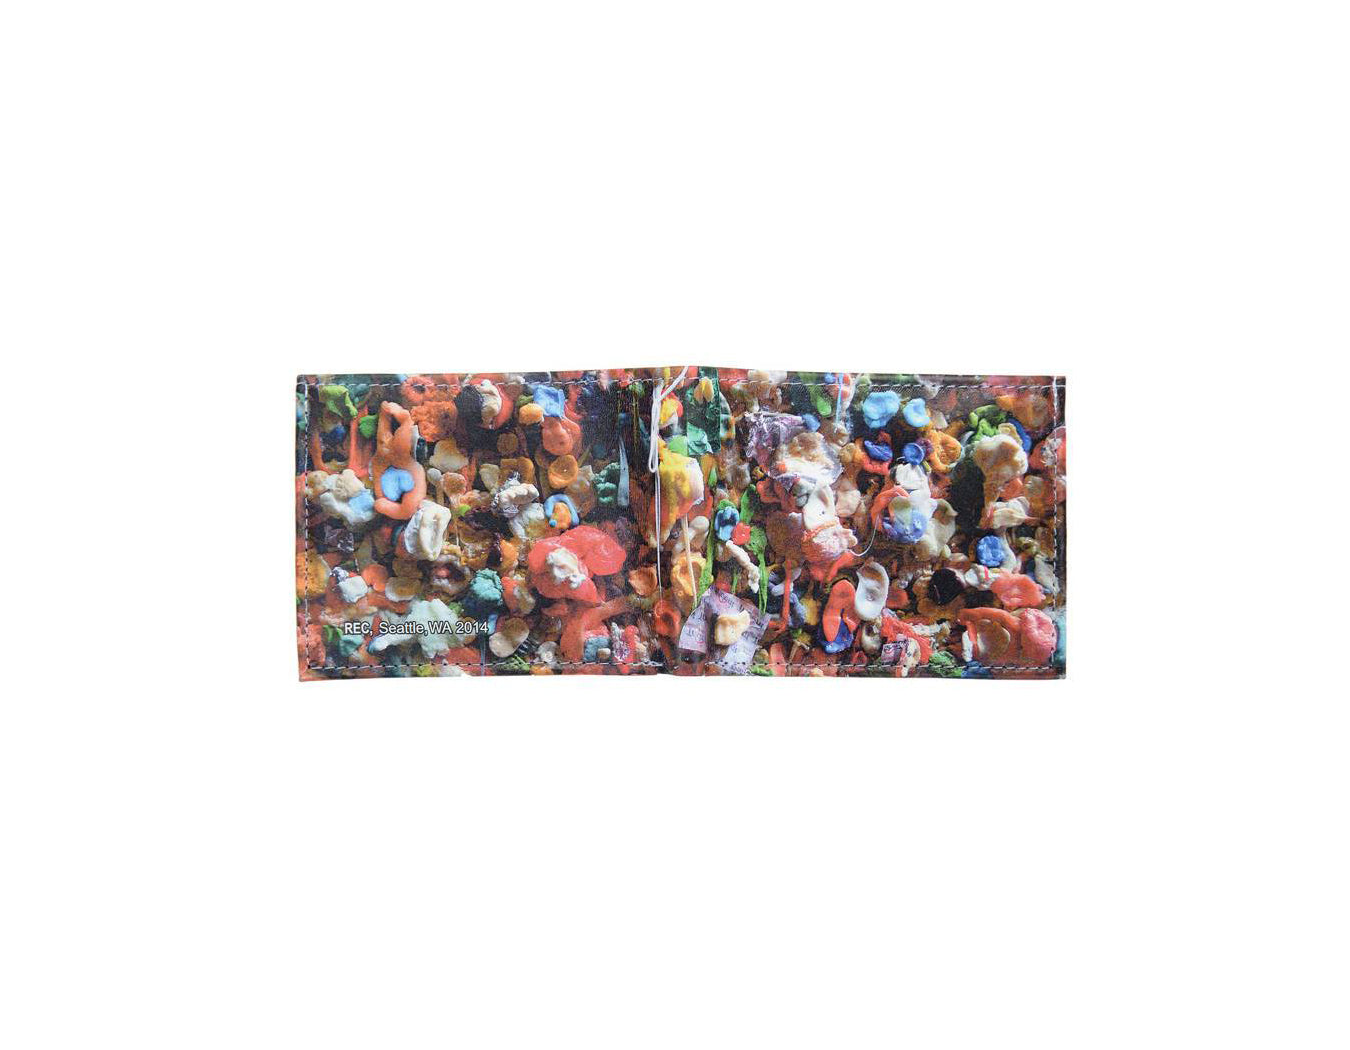 Leather Wallets - Gum Wall - Photography